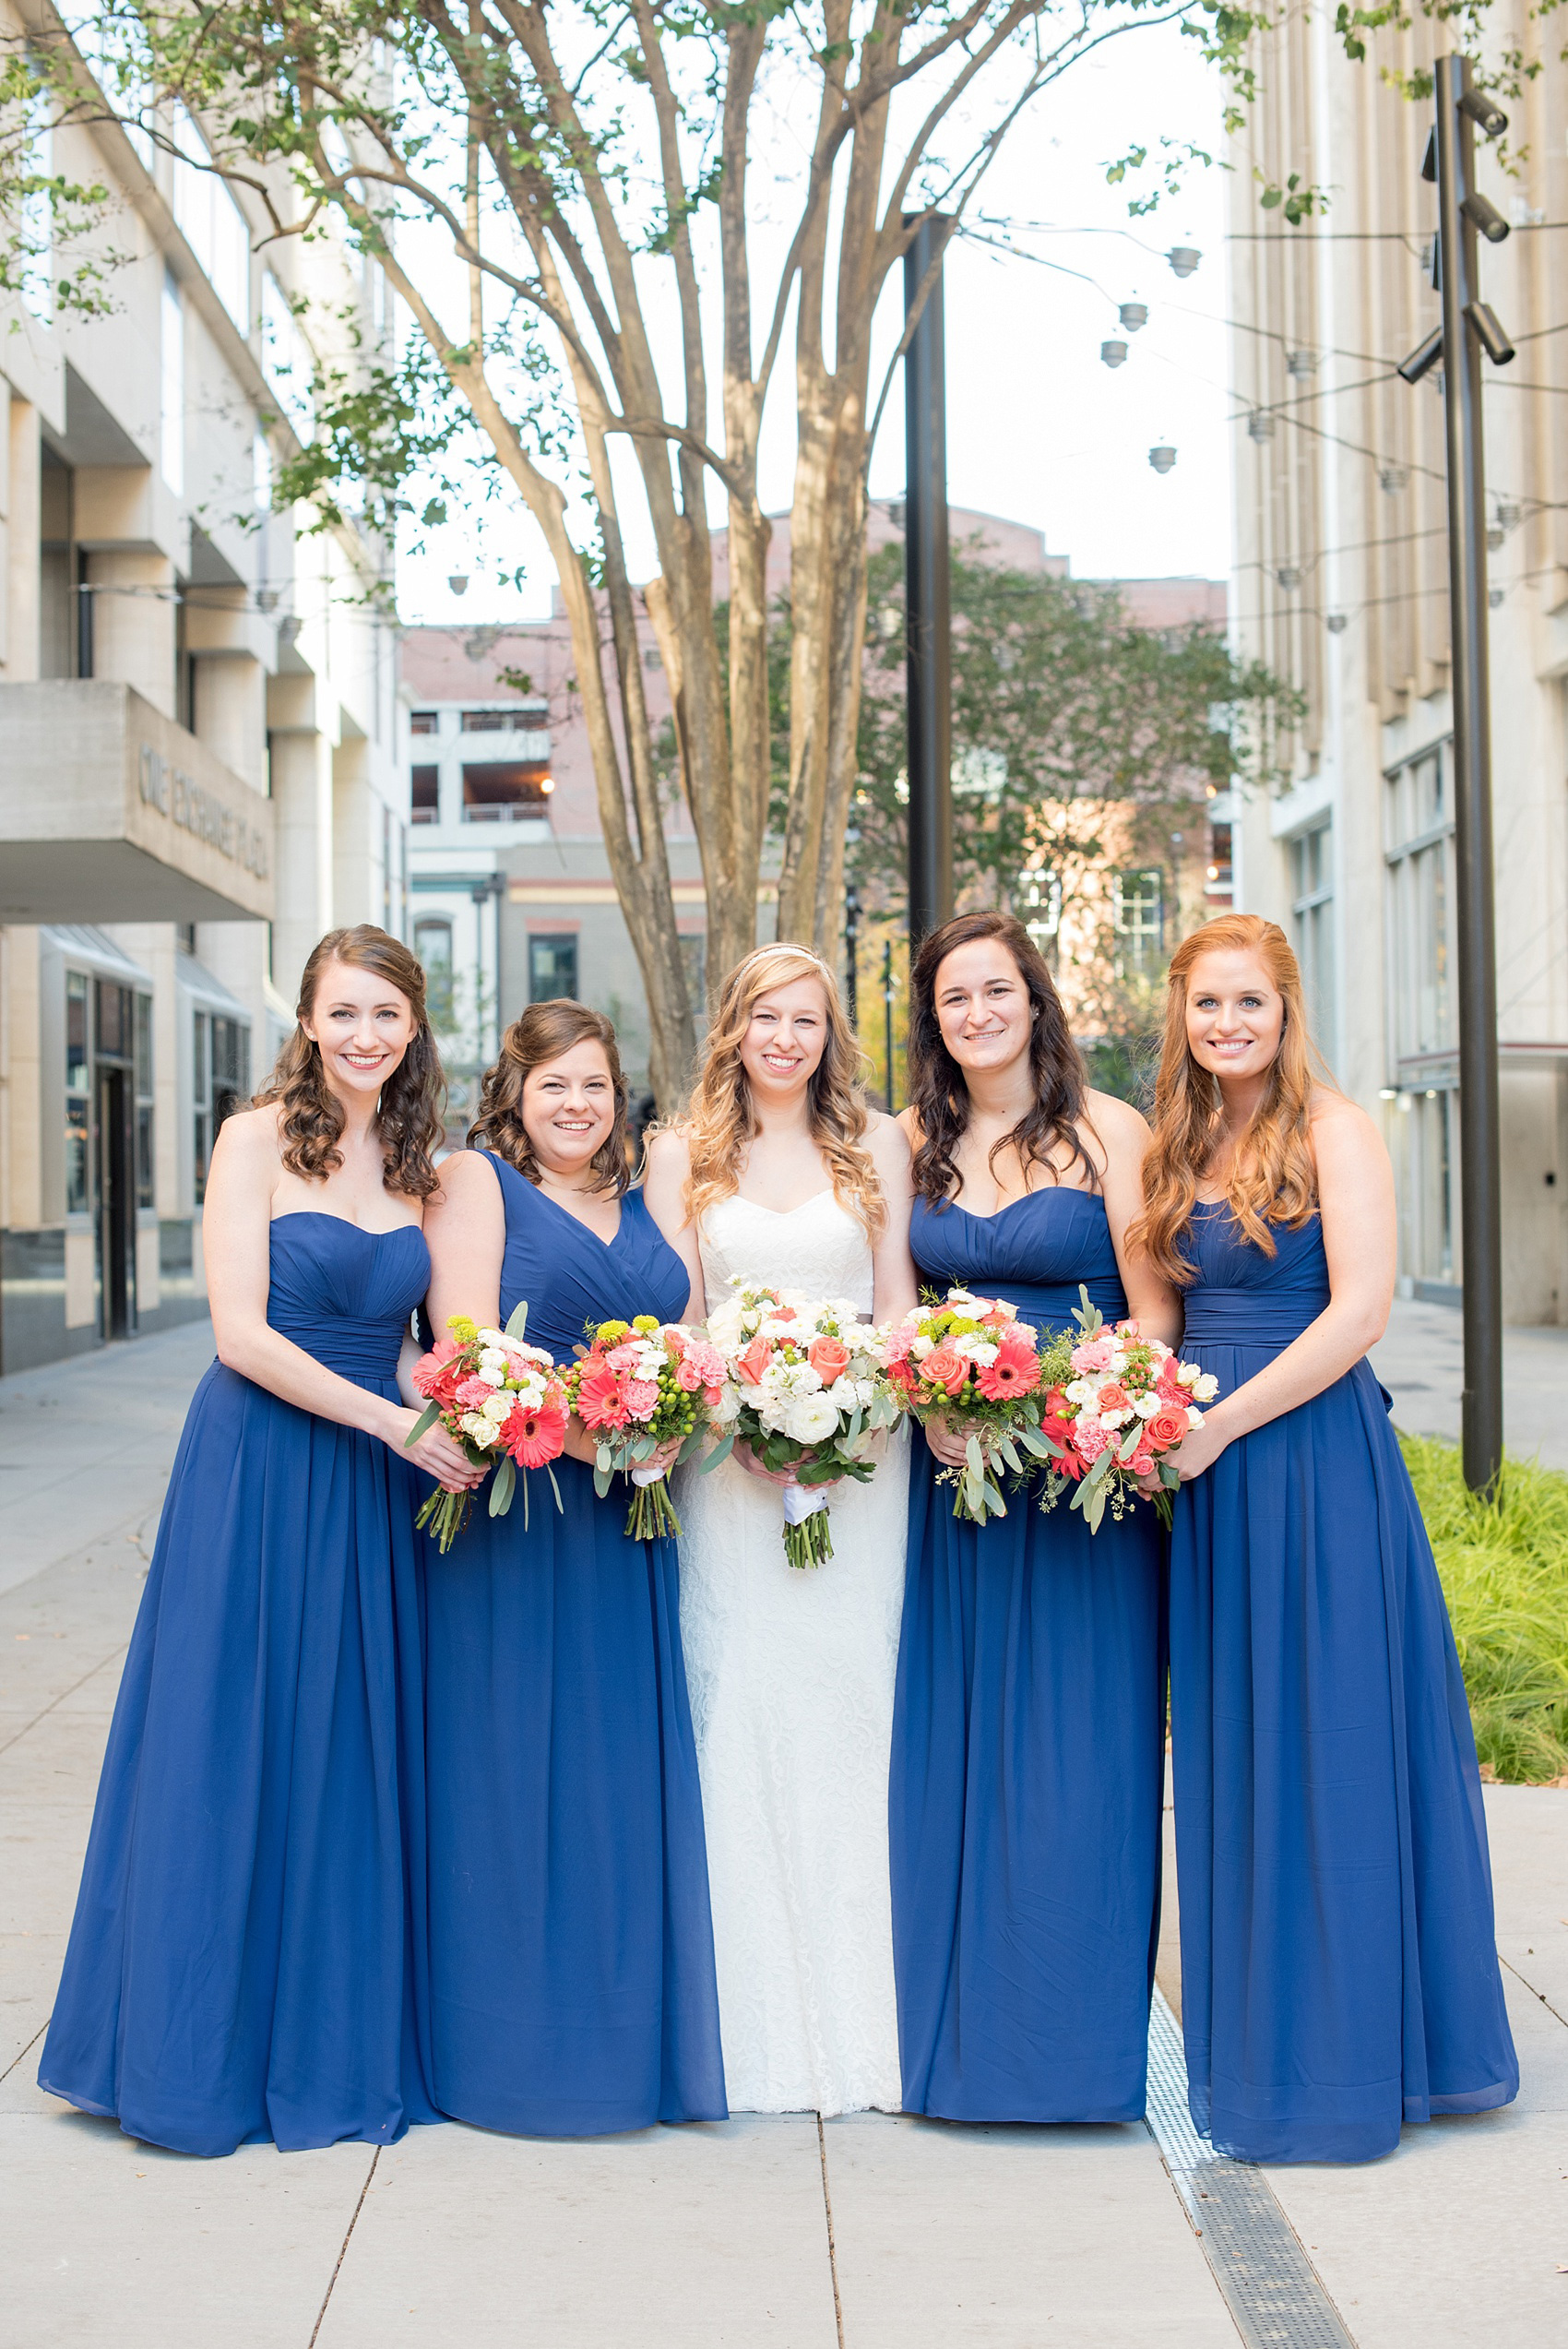 Mikkel Paige Photography photos from a wedding at The Stockroom at 230. A picture of the bride and her bridesmaids in cobalt blue in downtown Raleigh with coral and white bouquets.